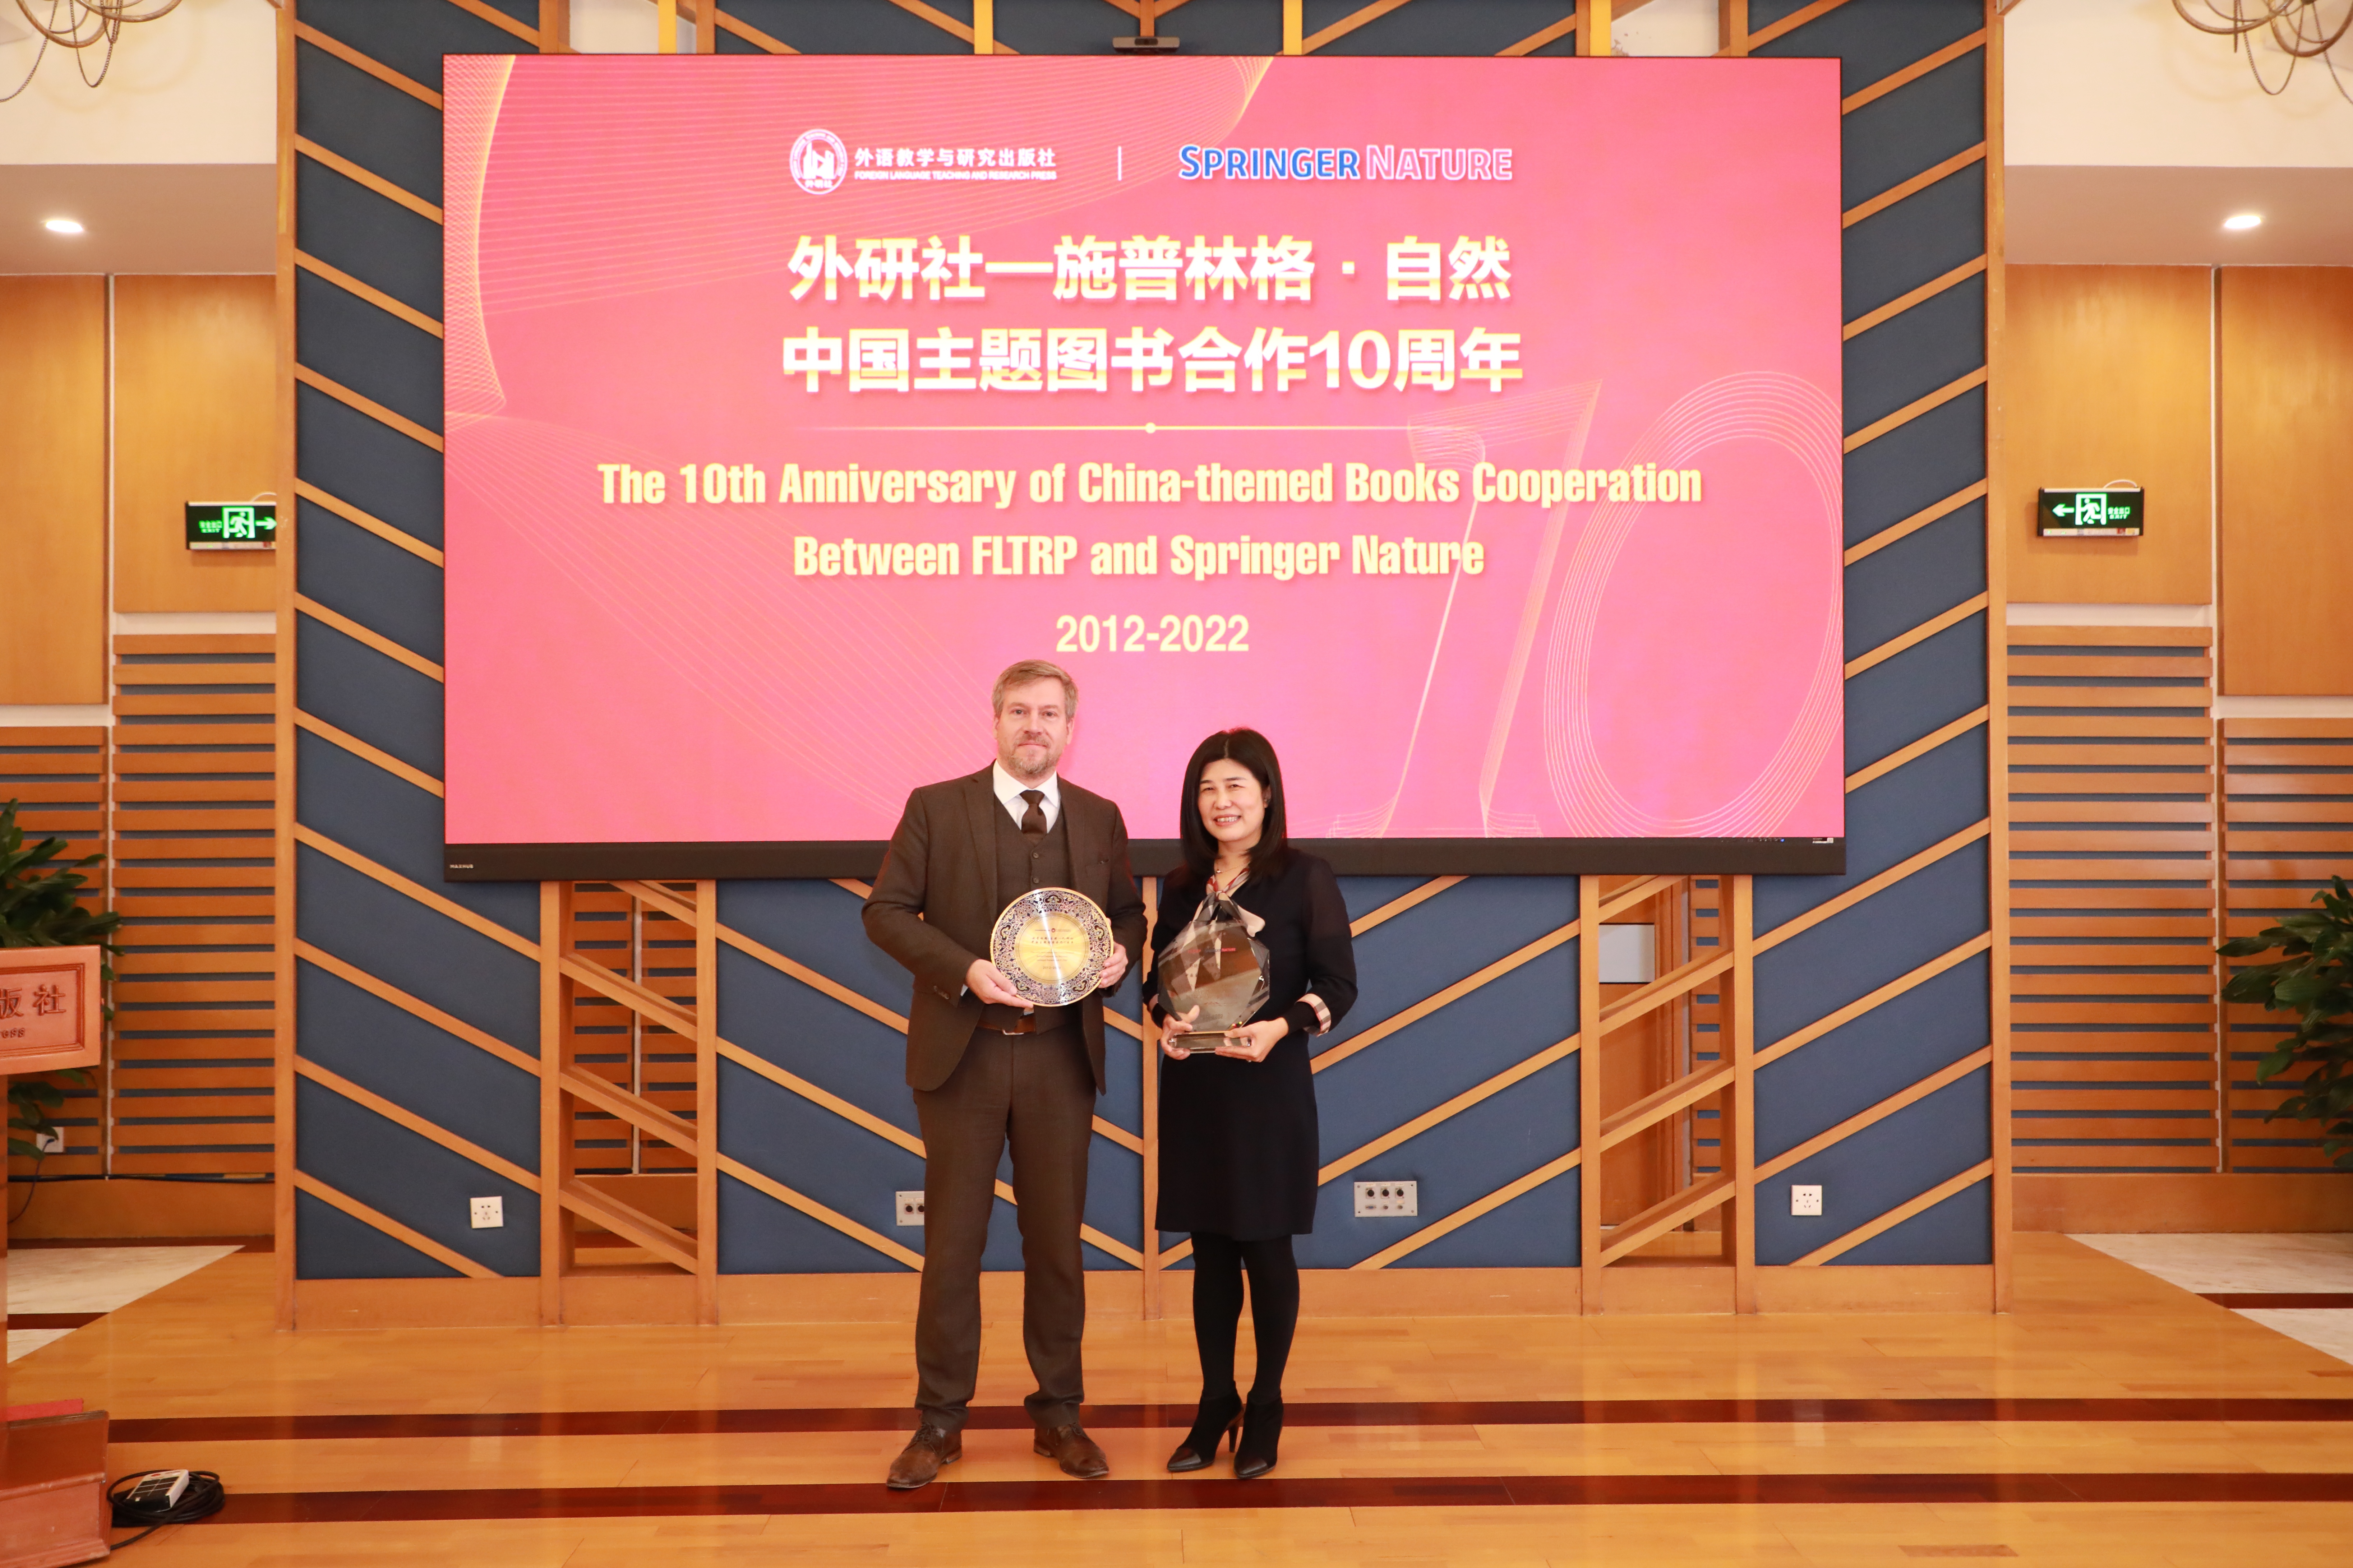 10th Anniversary Celebration for China-themed Books Cooperation between FLTRP and Springer Nature